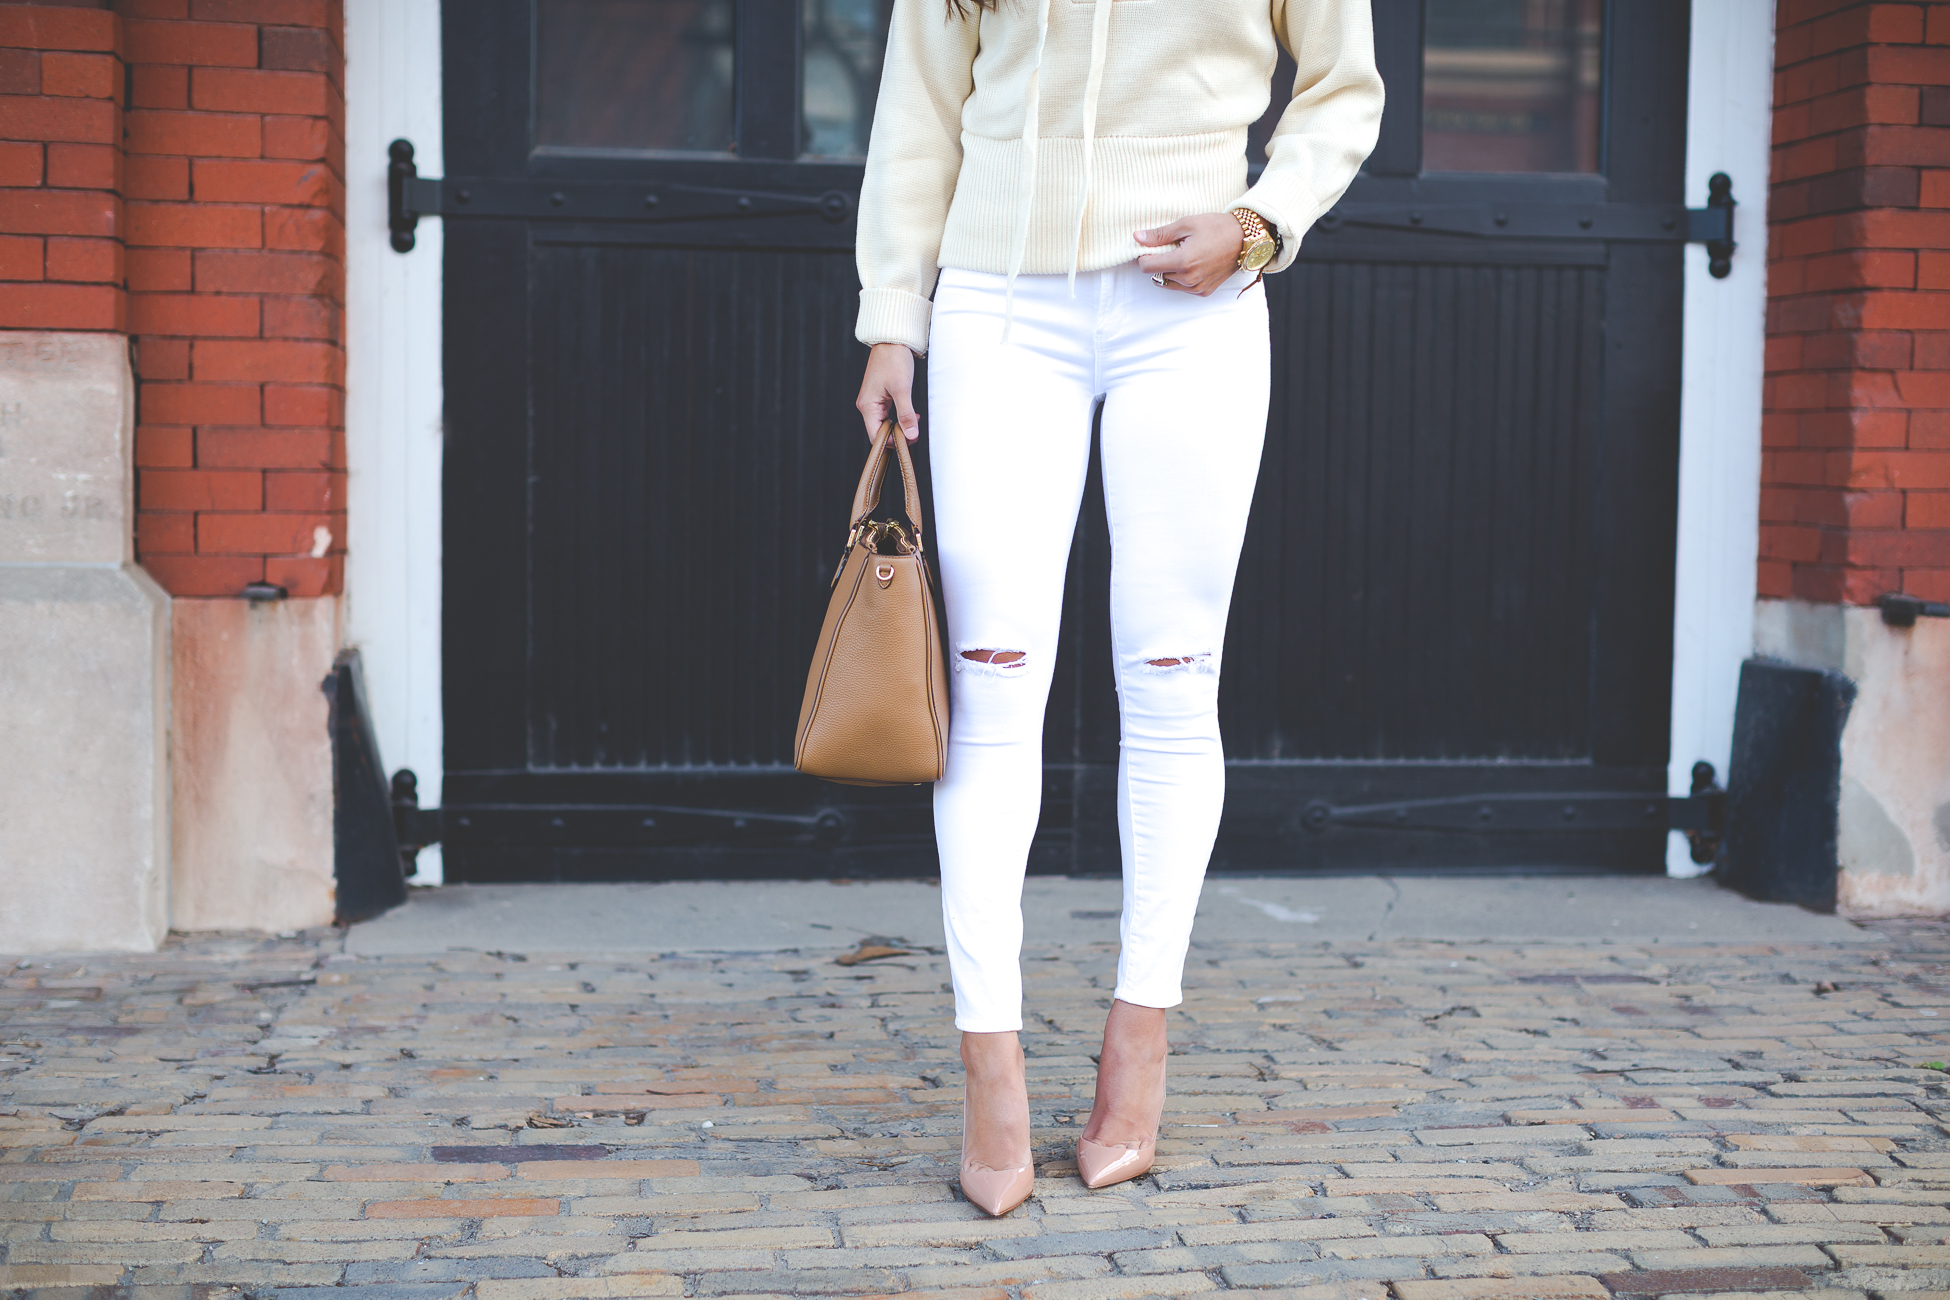 lace up sweater, lace up top, spring fashion, white distressed skinny jeans, white jeans, nasty gal lace up sweater, casual spring outfit, spring fashion, date night outfit ideas, date night fashion, louisville fashion blogger, kentucky fashion blogger, nude christian louboutin so kate pumps // grace wainwright from a southern drawl